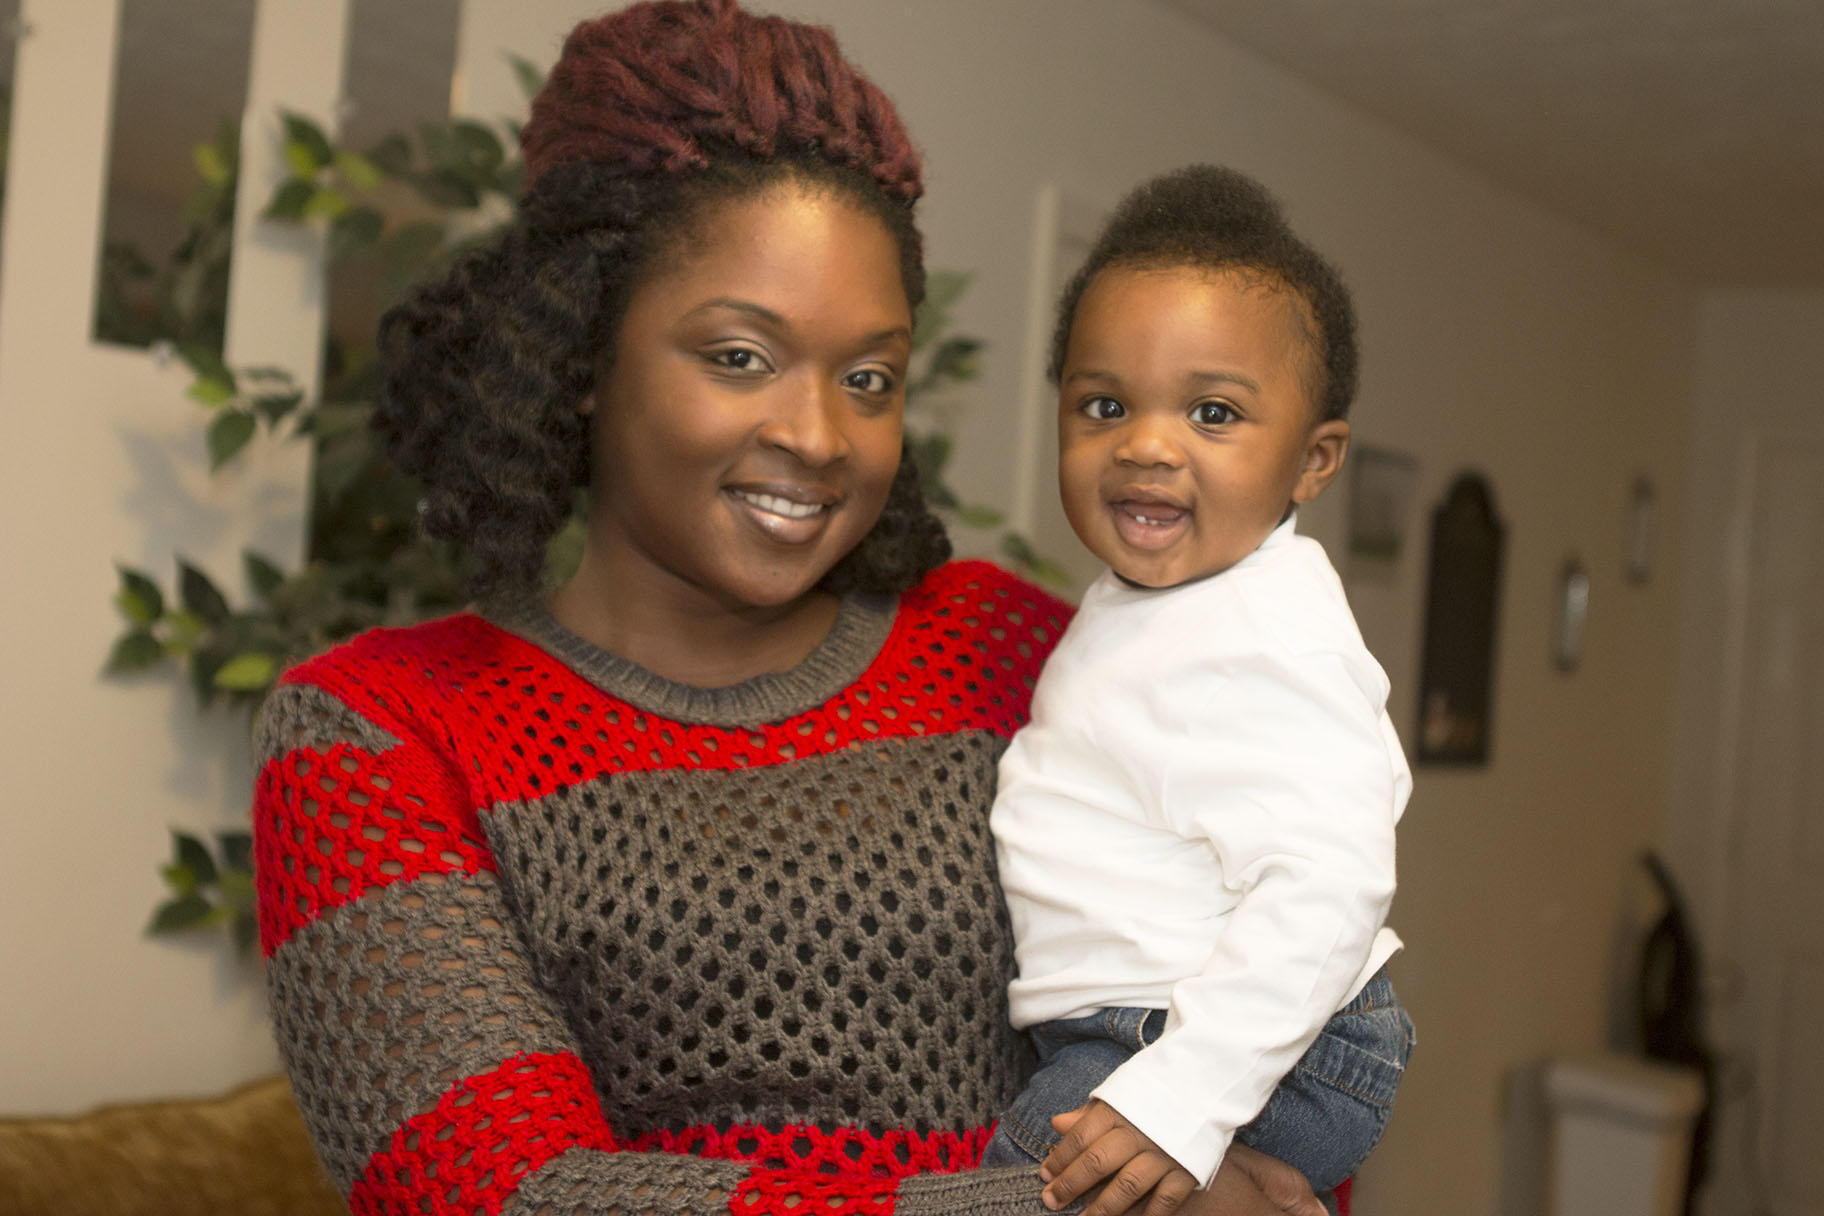 Breondra with her son.